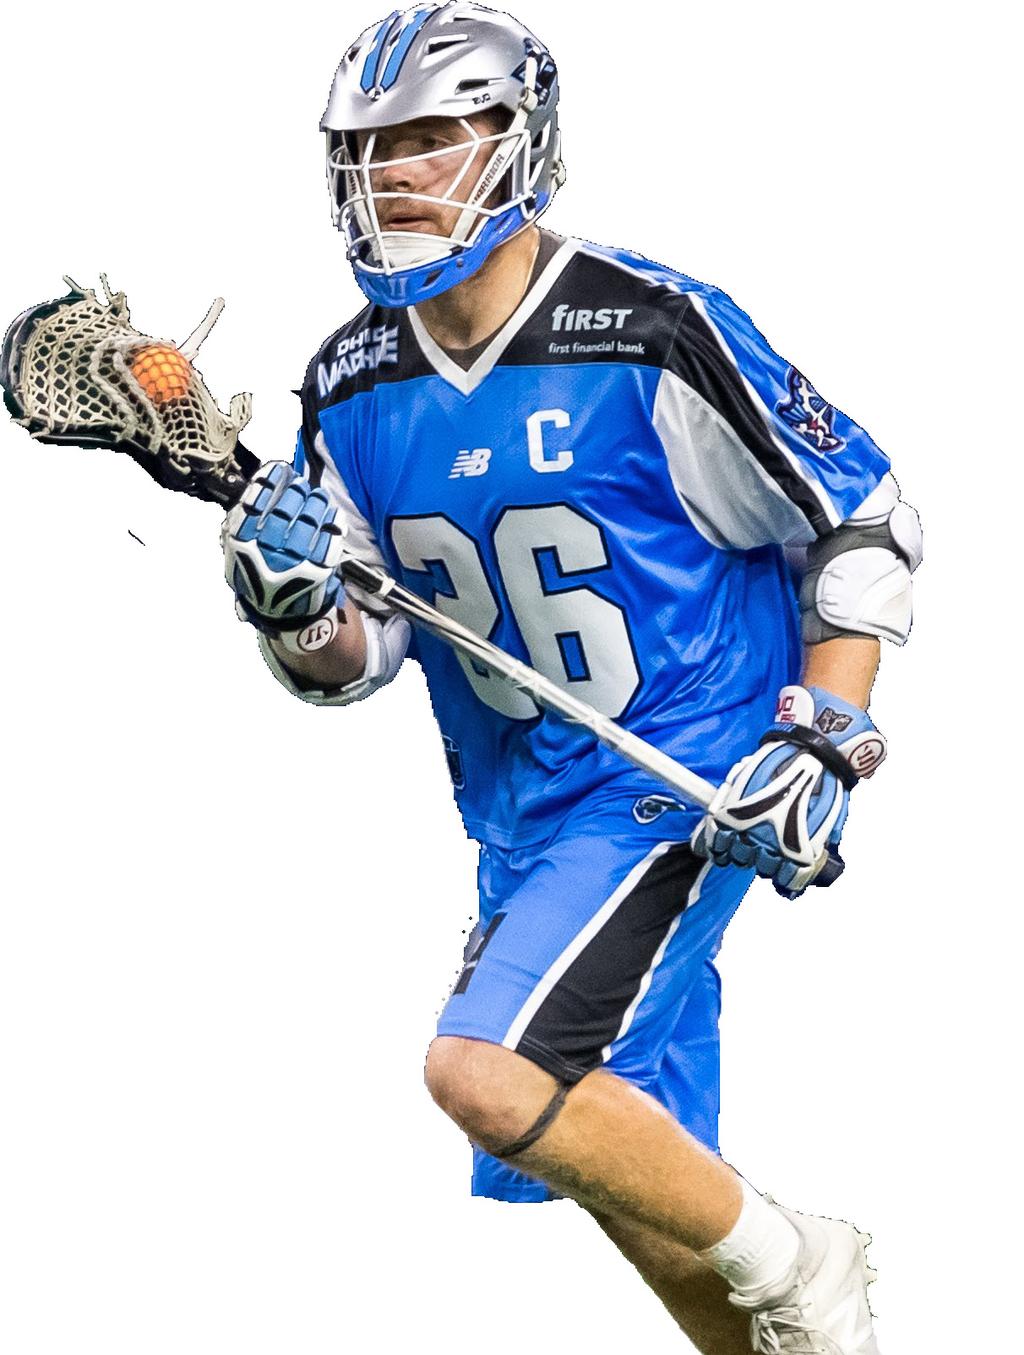 TOM SCHREIBER MIDFIELD #26 6 4 265 LBS BORN 2/24/92 HOW ACQUIRED: 2014 MLL DRAFT (1ST OVERALL) TOM AT A GLANCE 2017 MLL SEASON: Voted No. 1 on LSN s Top 25 Players List.